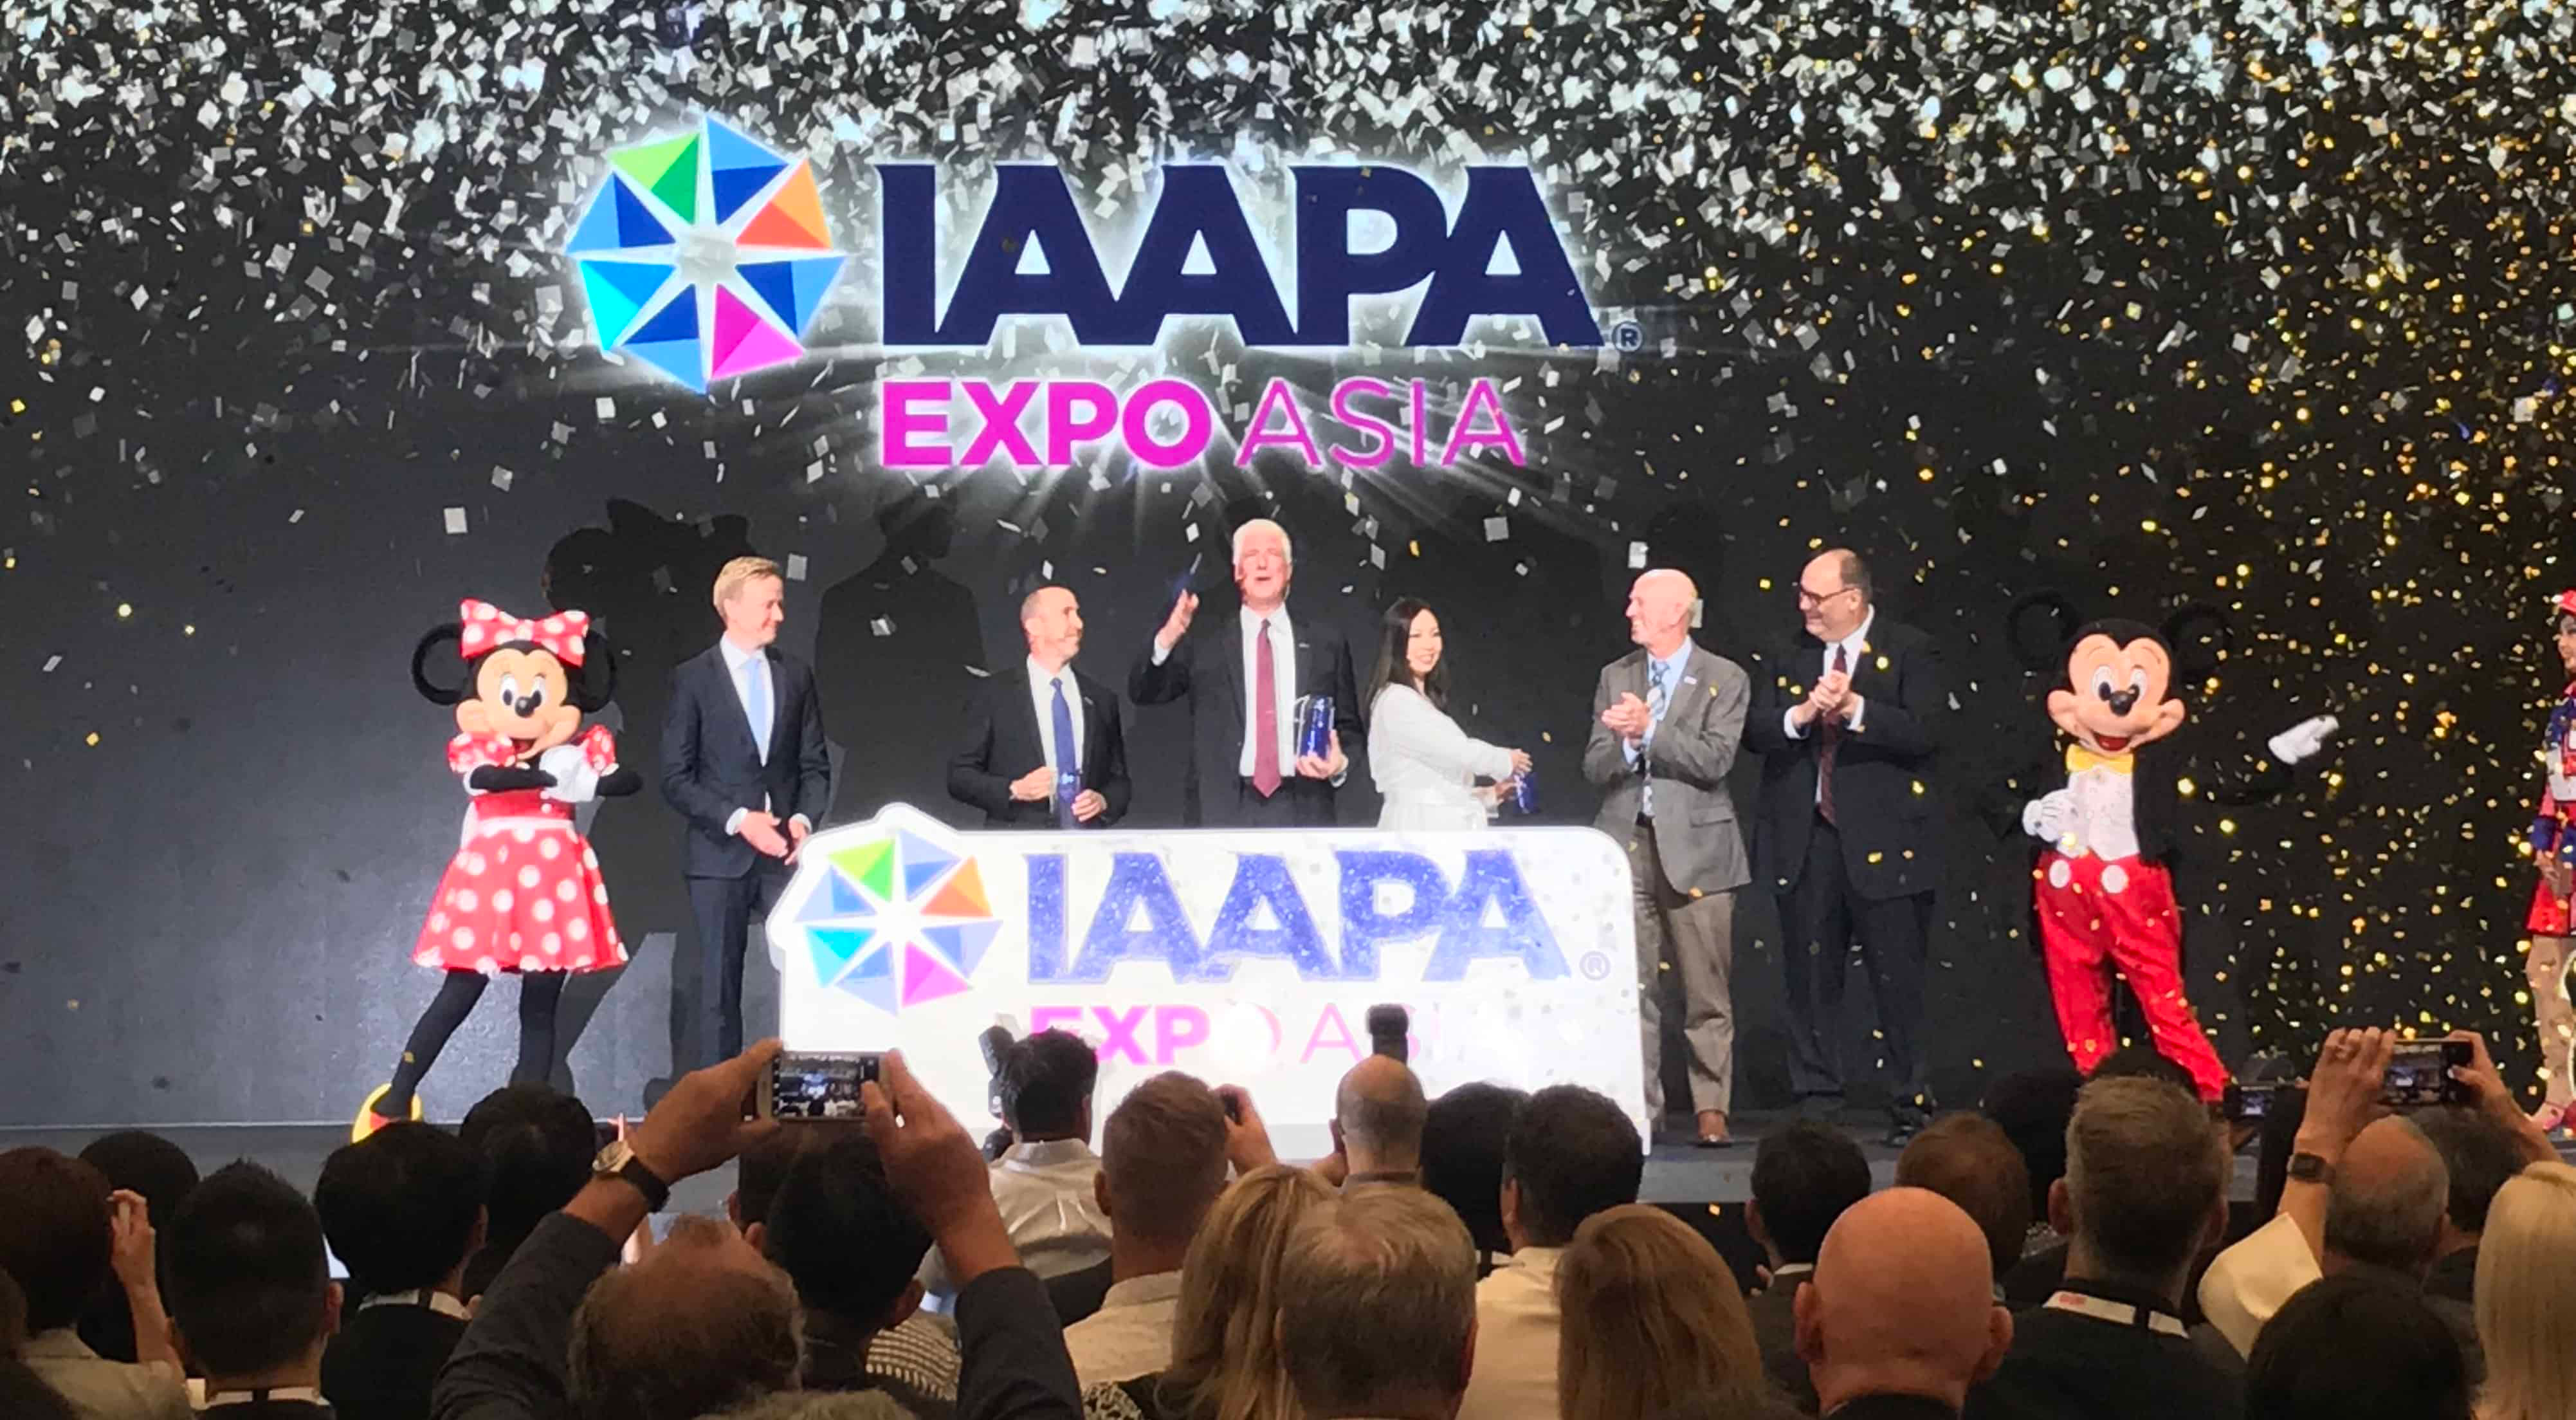 Opening ceremonies at the main stage of IAAPA Expo Asia 2019